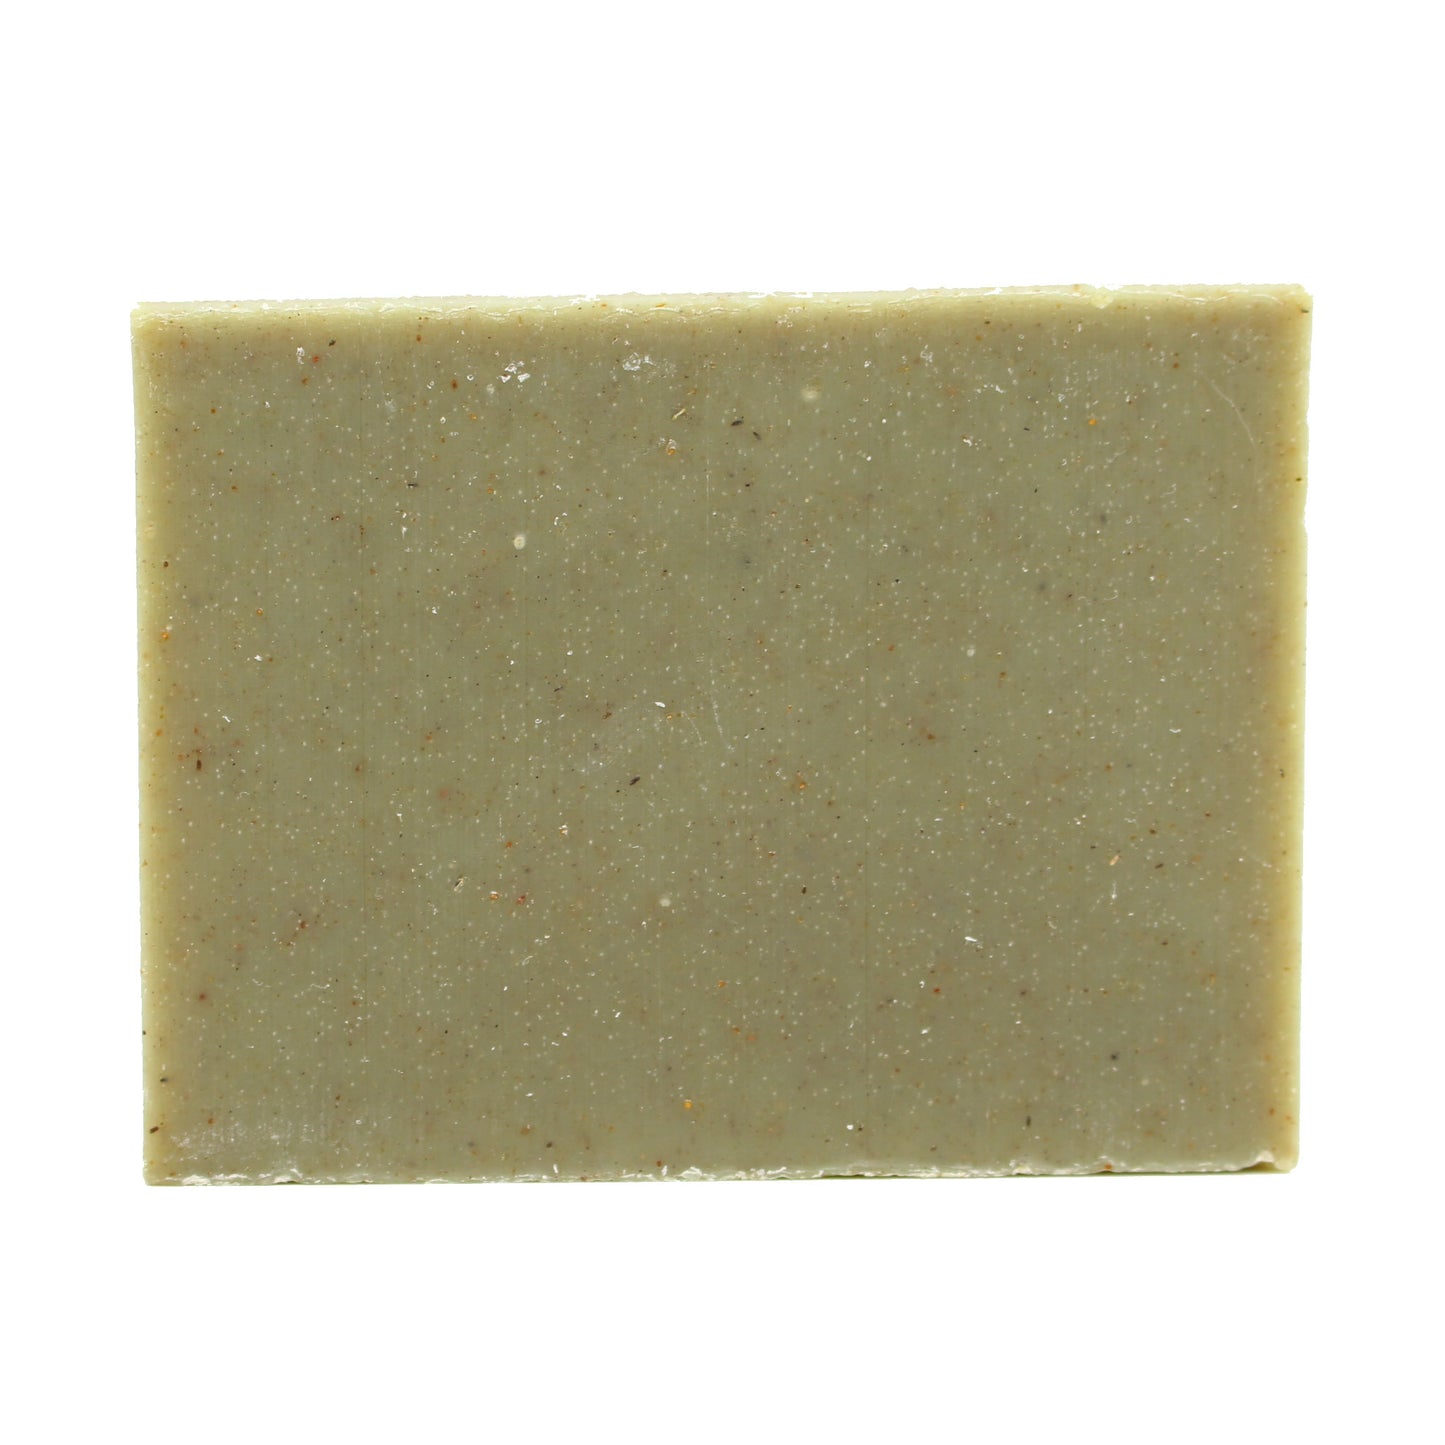 Grove - A Woodsy Blend of Cedar, Pine and Basil - Extra Large Organic Bar Soap